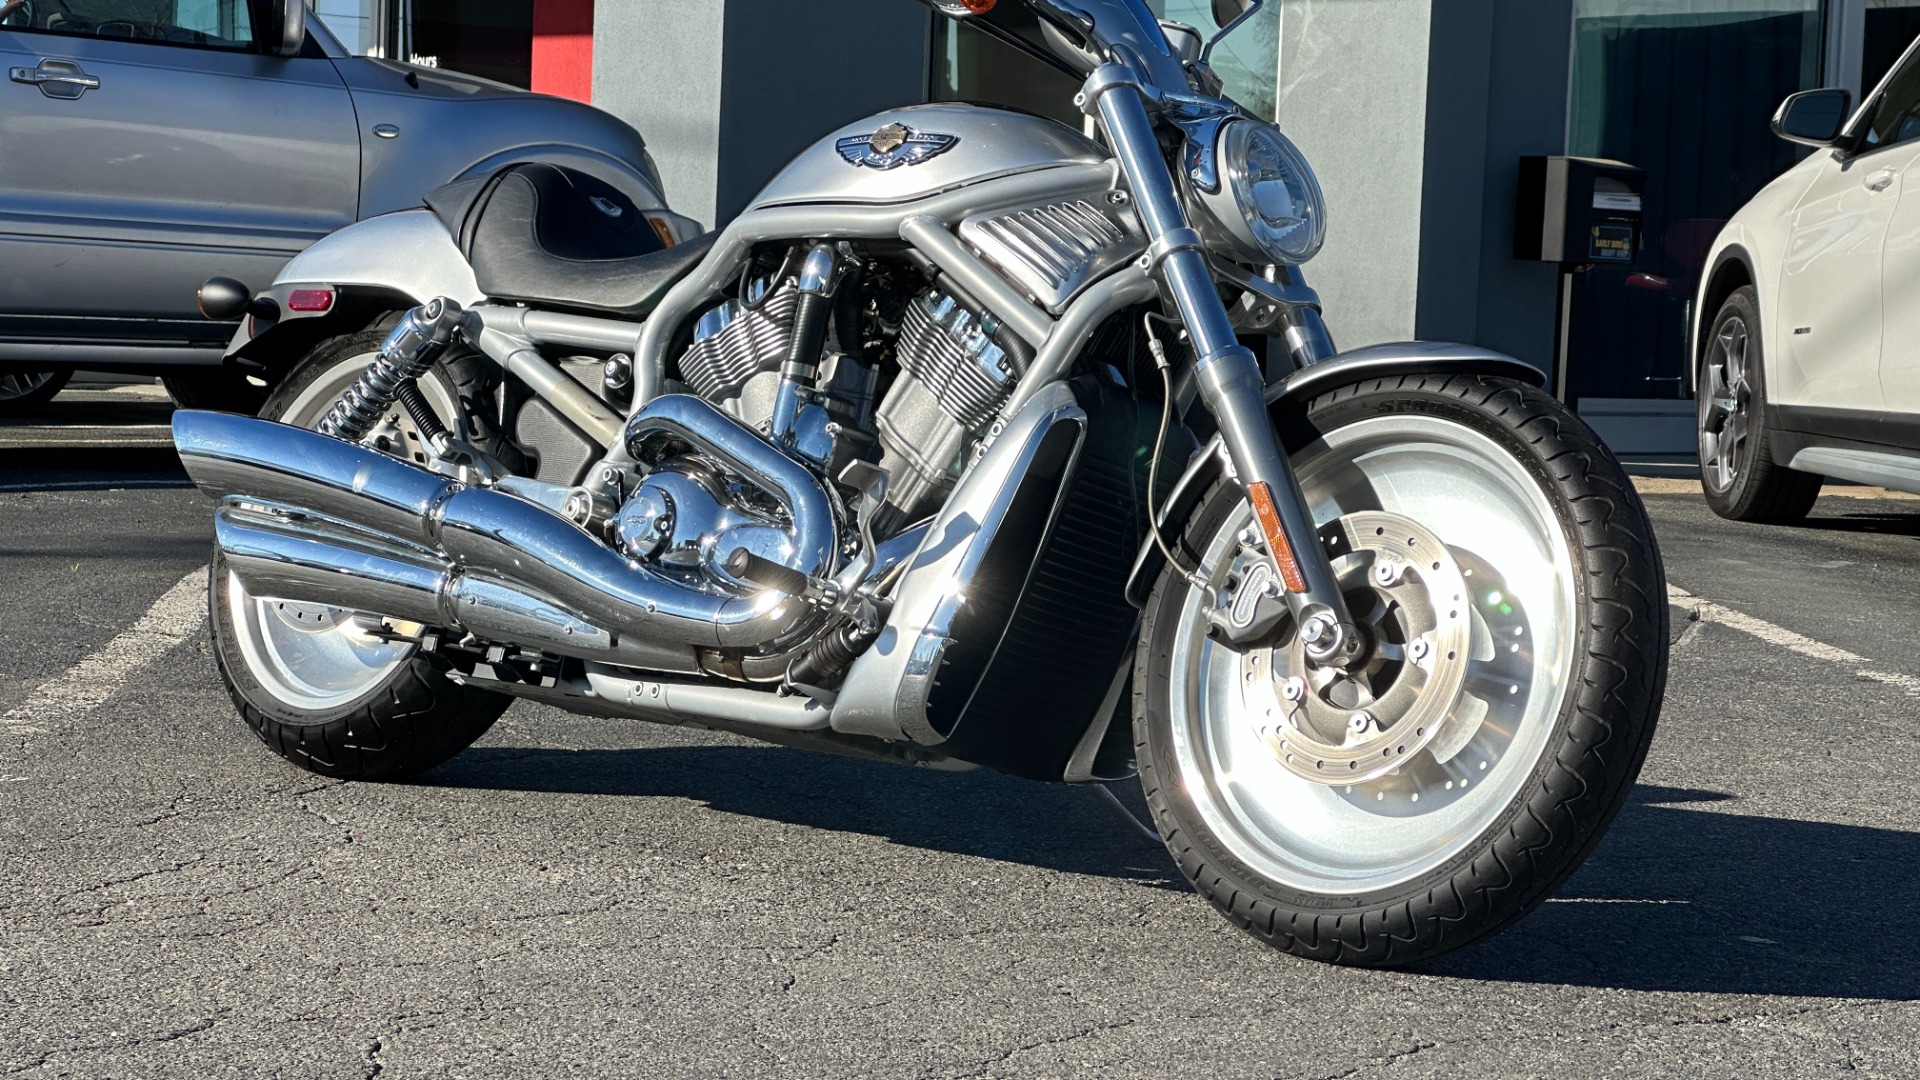 Used 2003 Harley Davidson V Rod ANNIVERSARY EDITION / 1130CC ENGINE / BREMBO BRAKES / VORTEX AIR SCOOPS for sale $7,695 at Formula Imports in Charlotte NC 28227 53